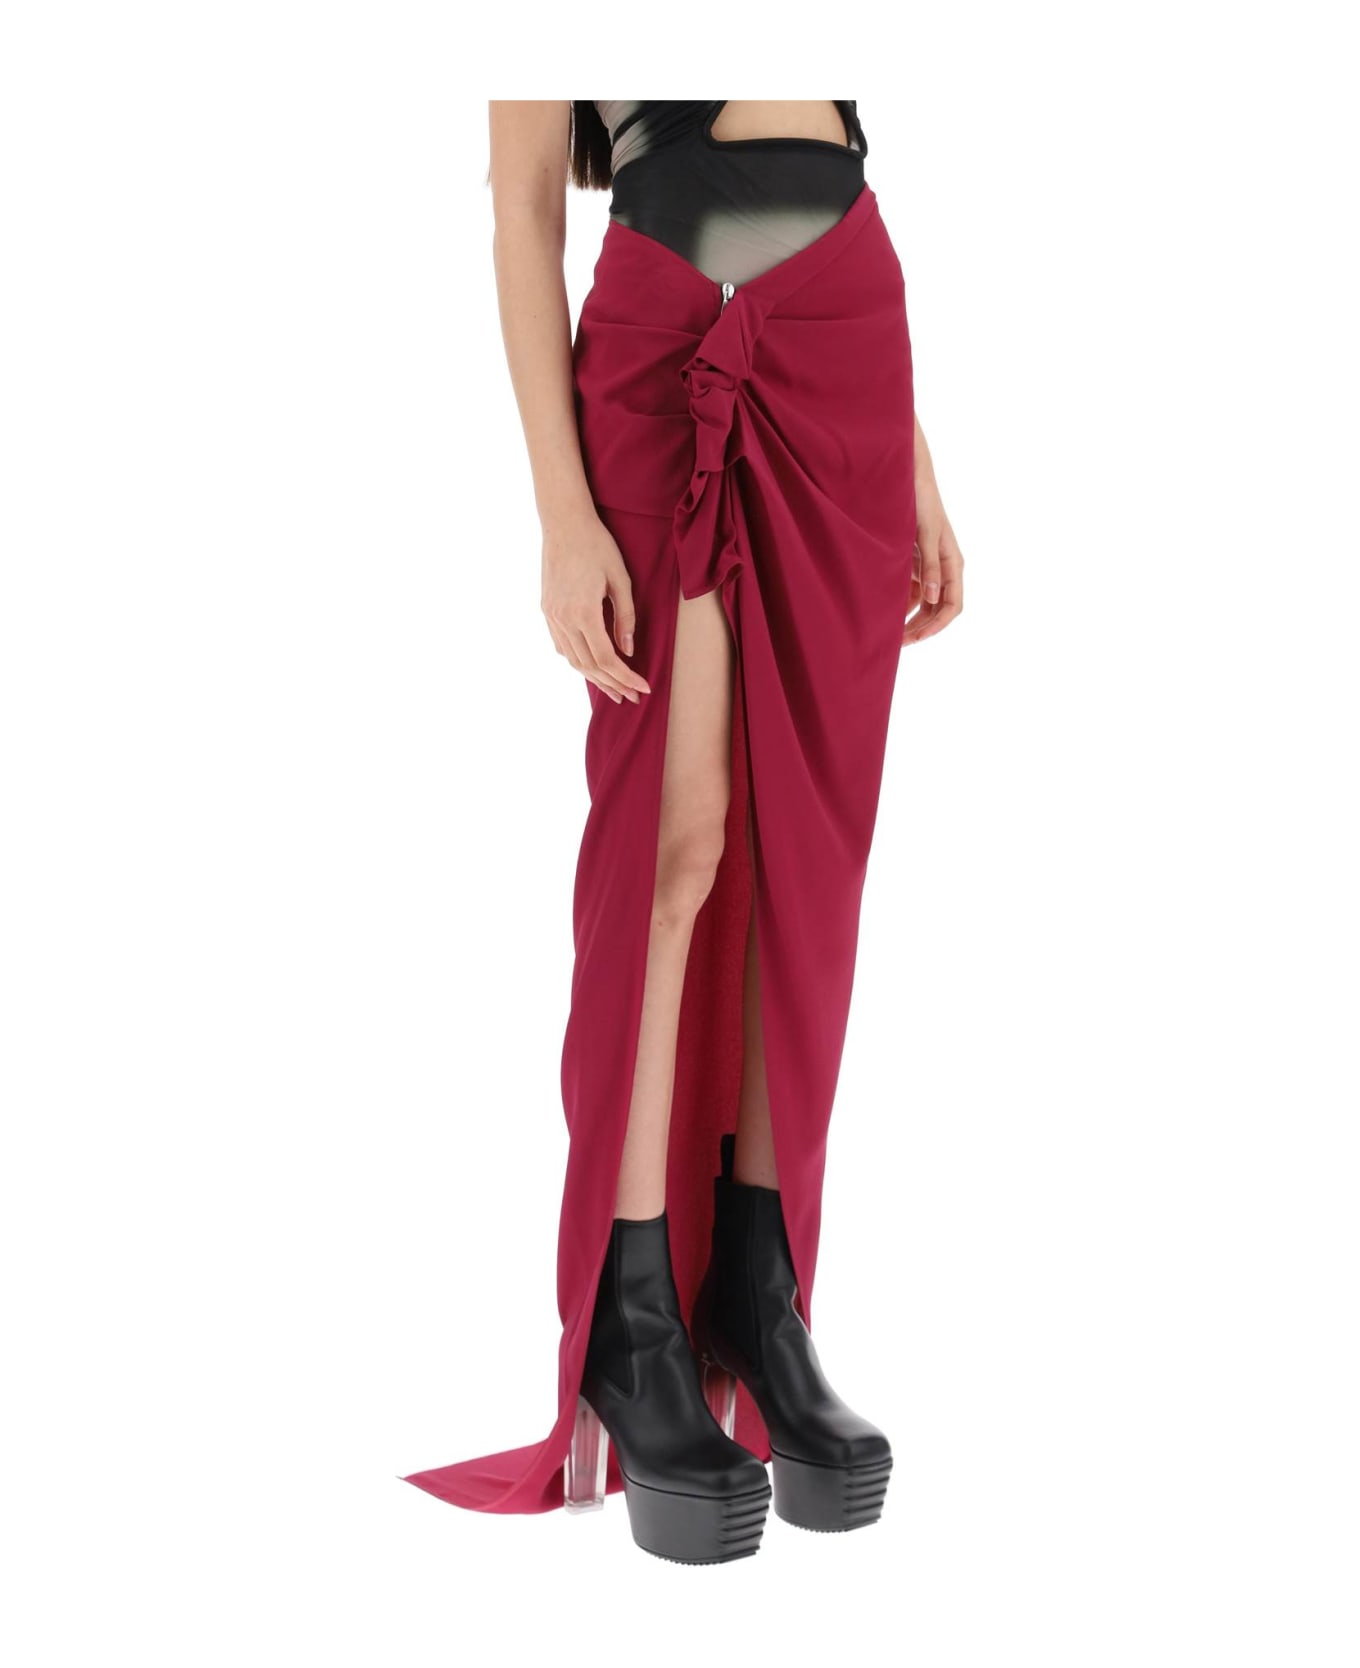 Rick Owens Draped Skirt With Slit And Train - FUXIA (Purple)